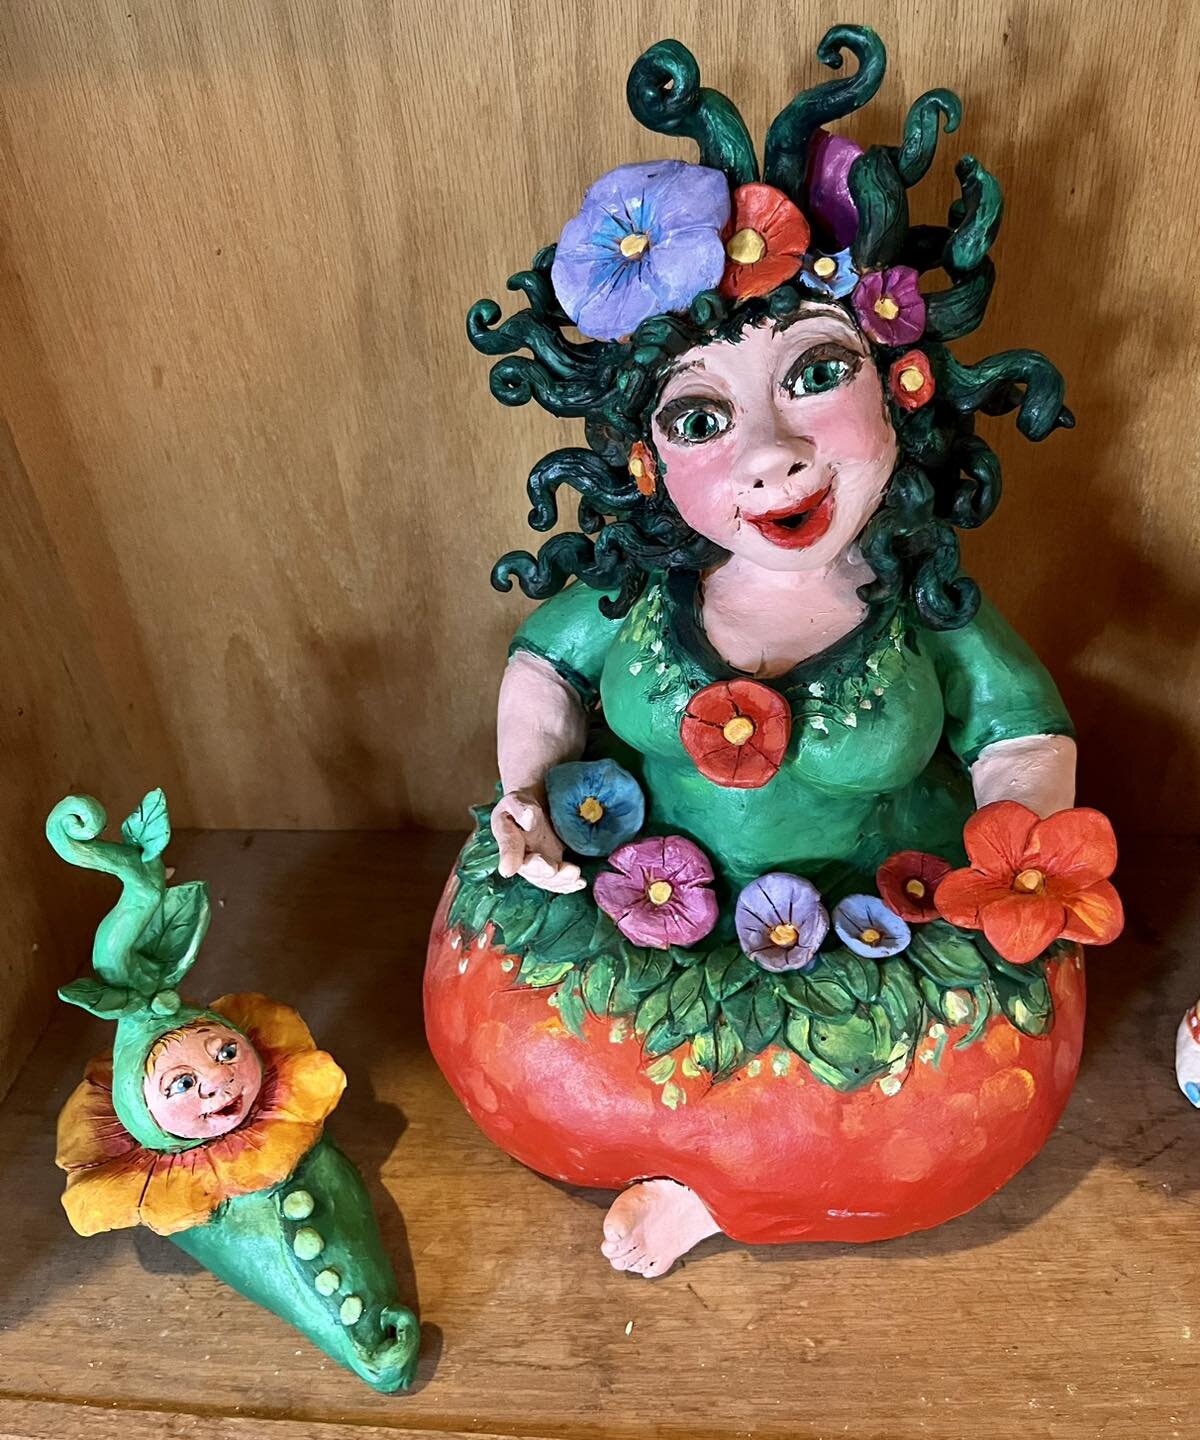 Happy gardening from my &ldquo;Garden Goddess &ldquo; and &ldquo;Pea pod Baby&rdquo;😄
2 of my favorites in my remaining sculpture collection. Stoneware clay with acrylic stains.